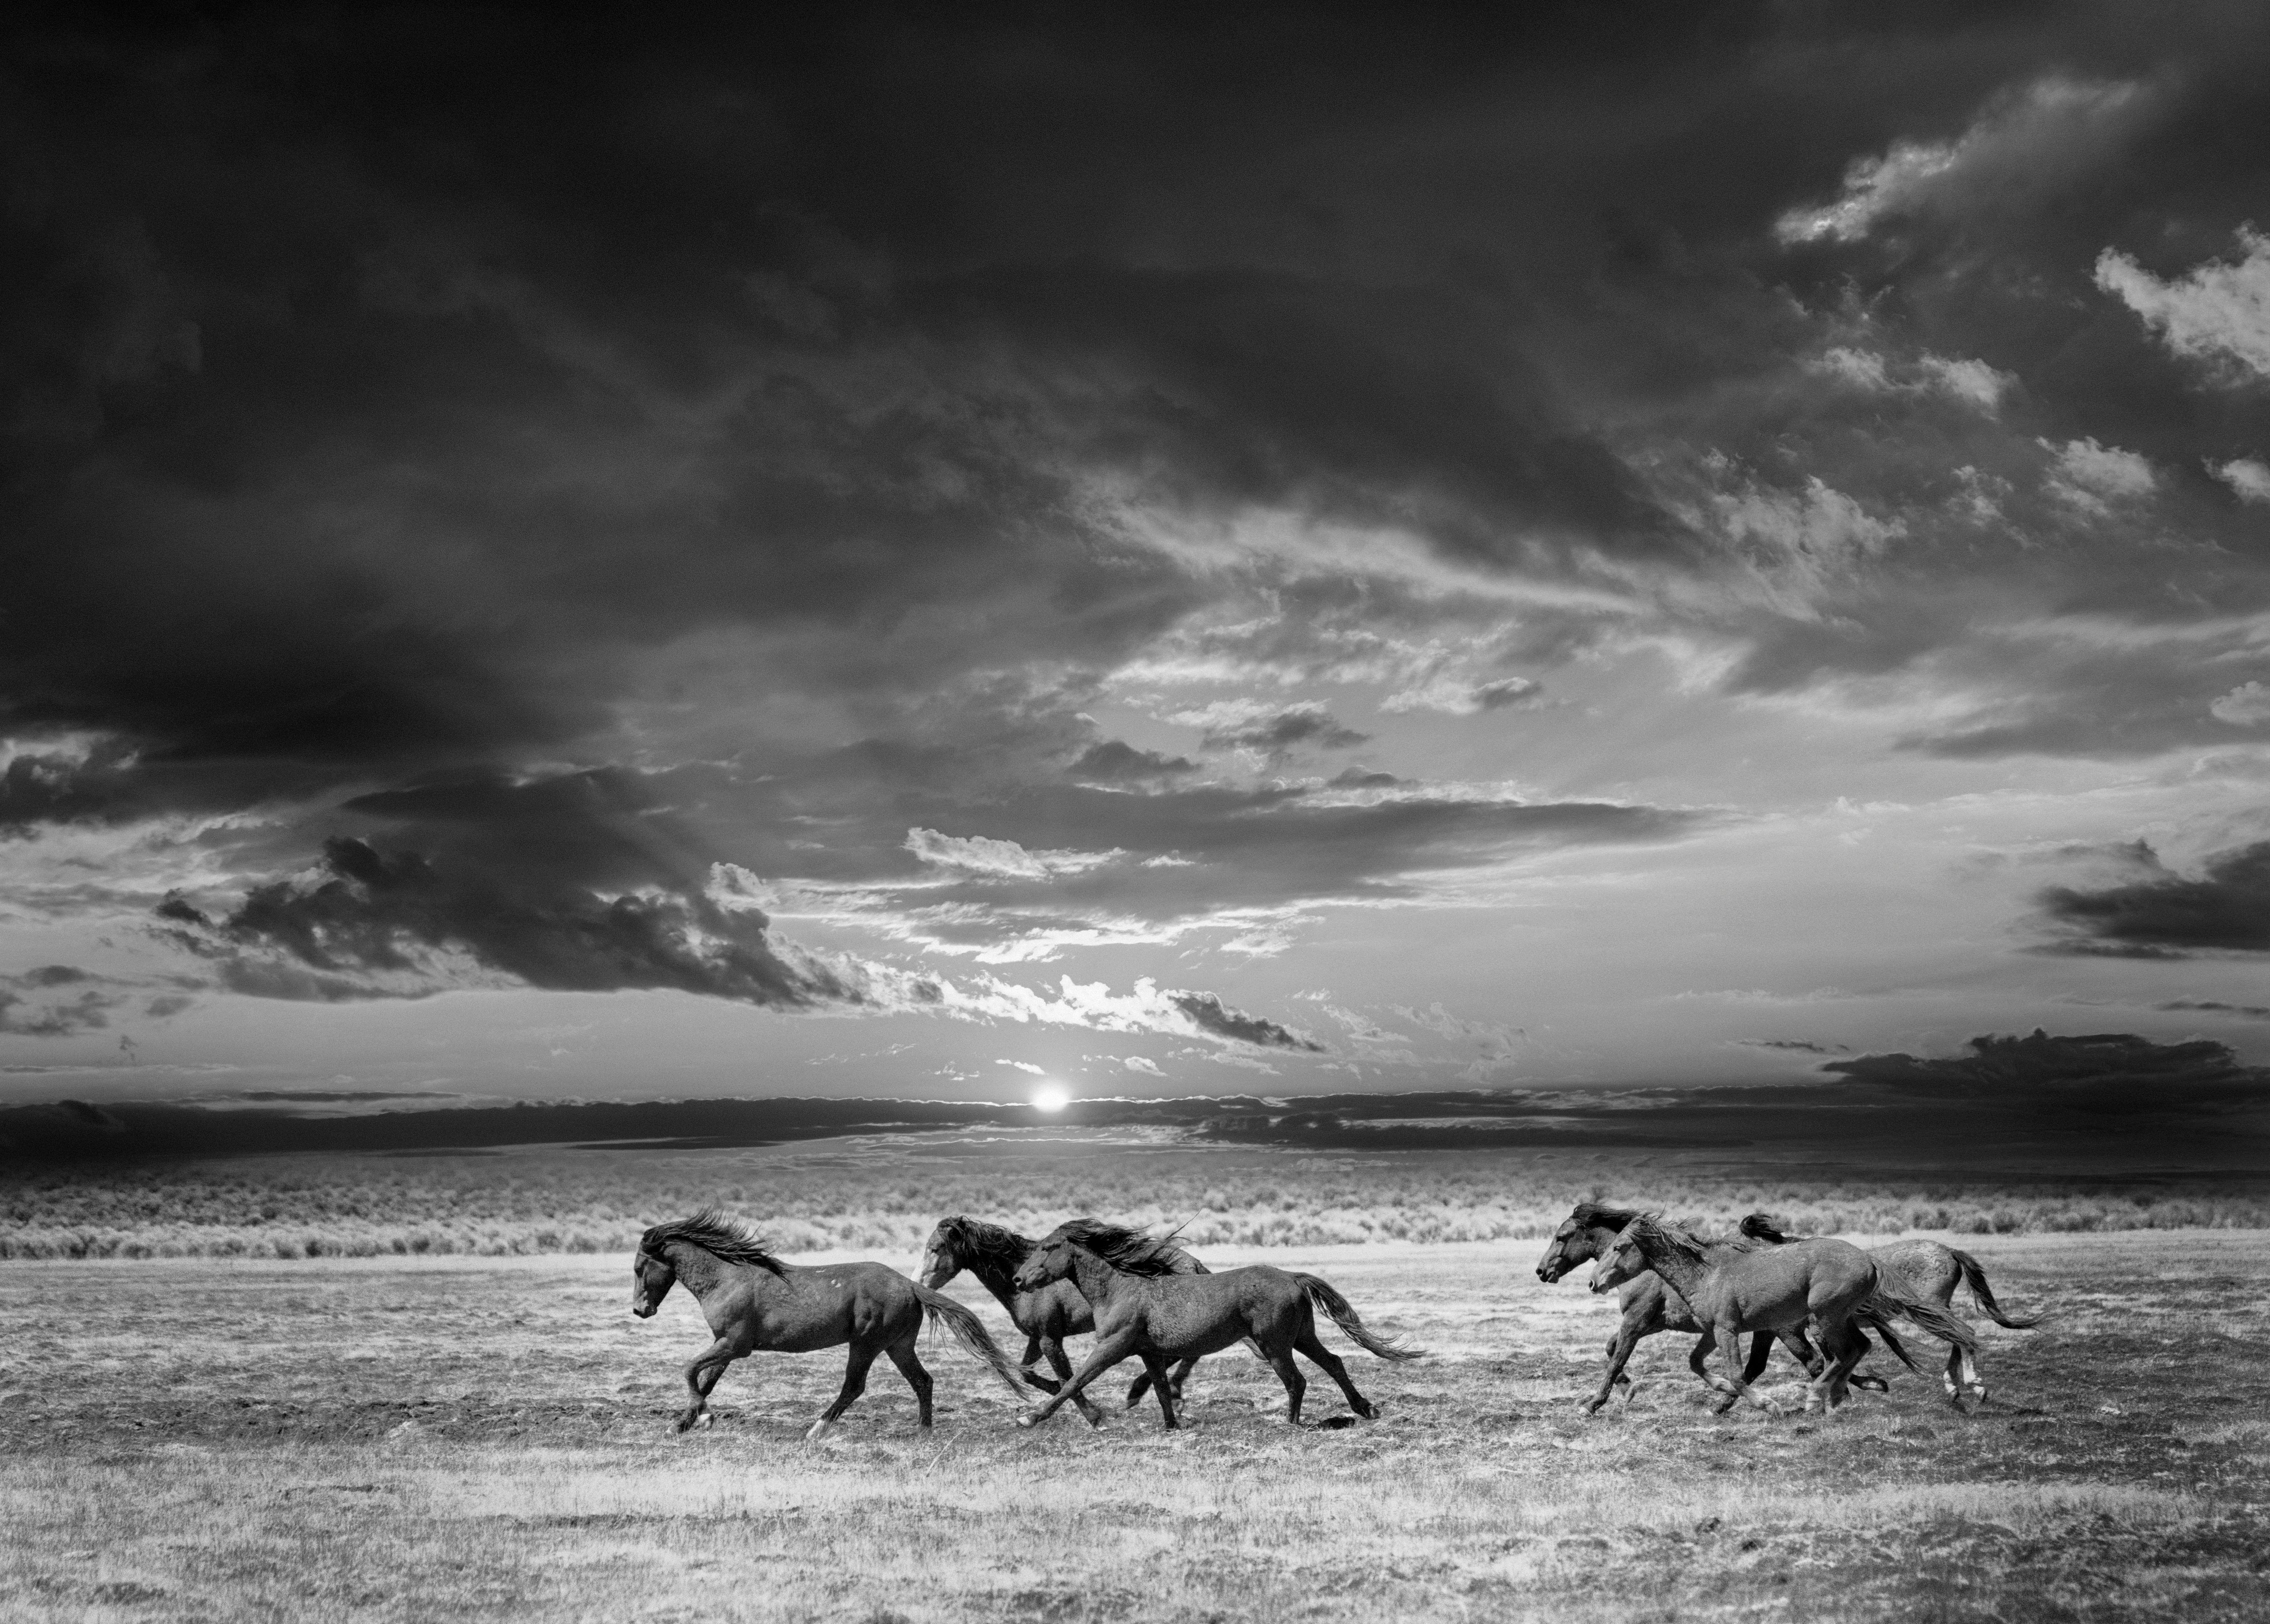 Shane Russeck Animal Print - 36x48 Photography of Wild Horses - Mustangs Photograph Print Sunset Landscape